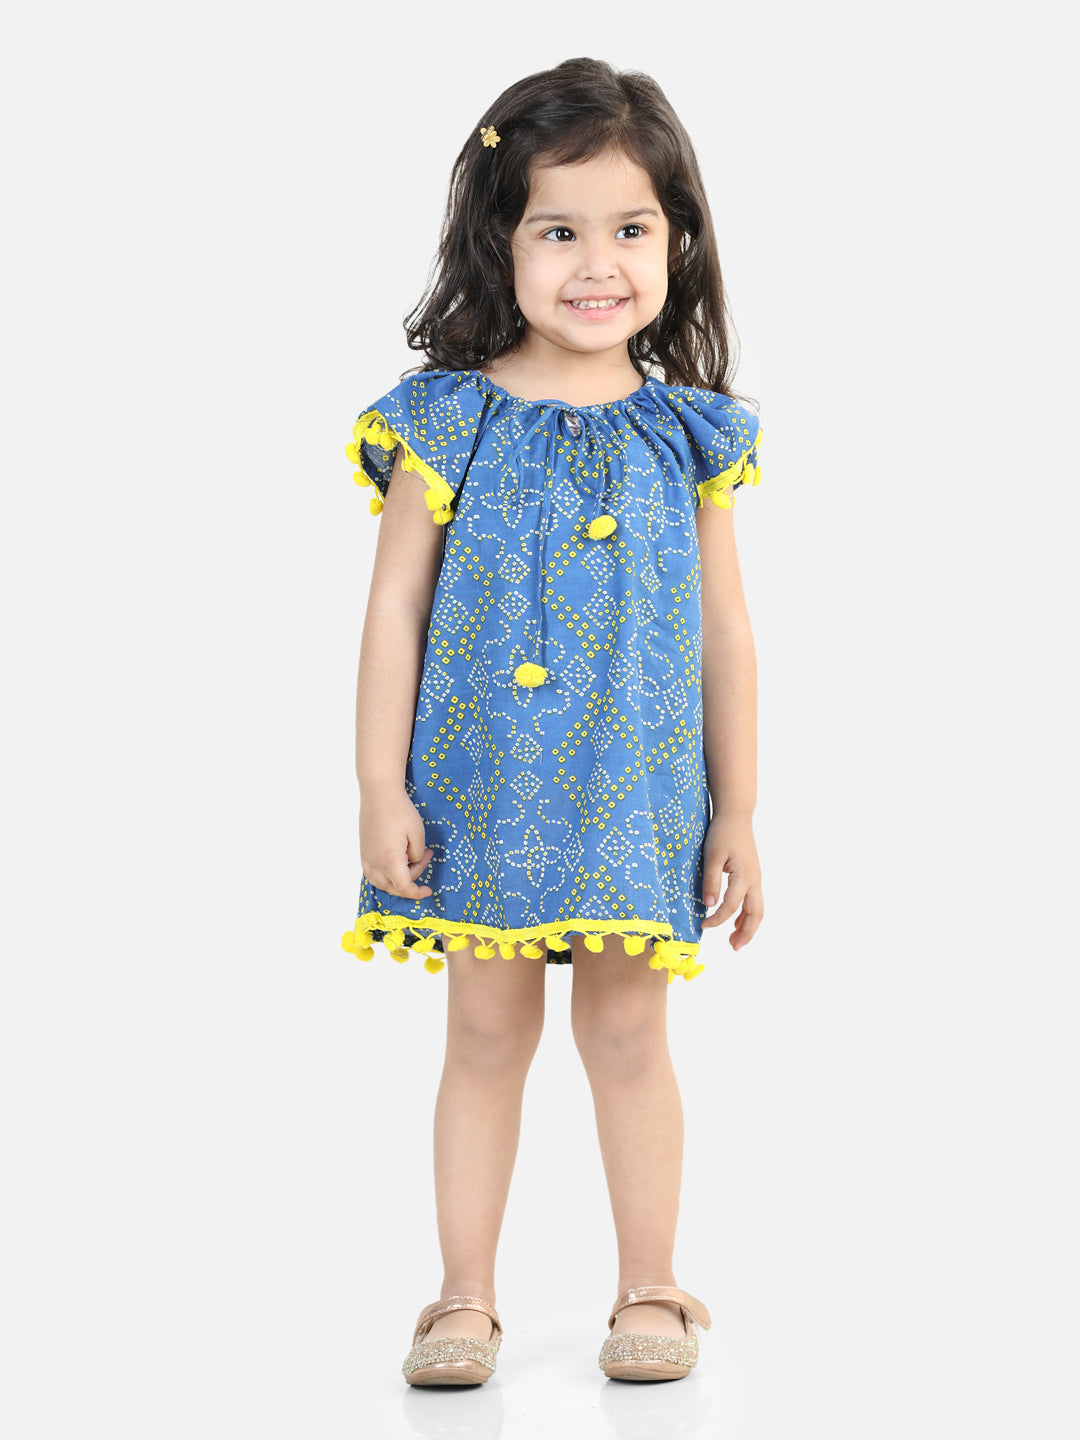 BownBee 100% Cotton Printed with Pompom Jhabla Frock for Girls - Blue